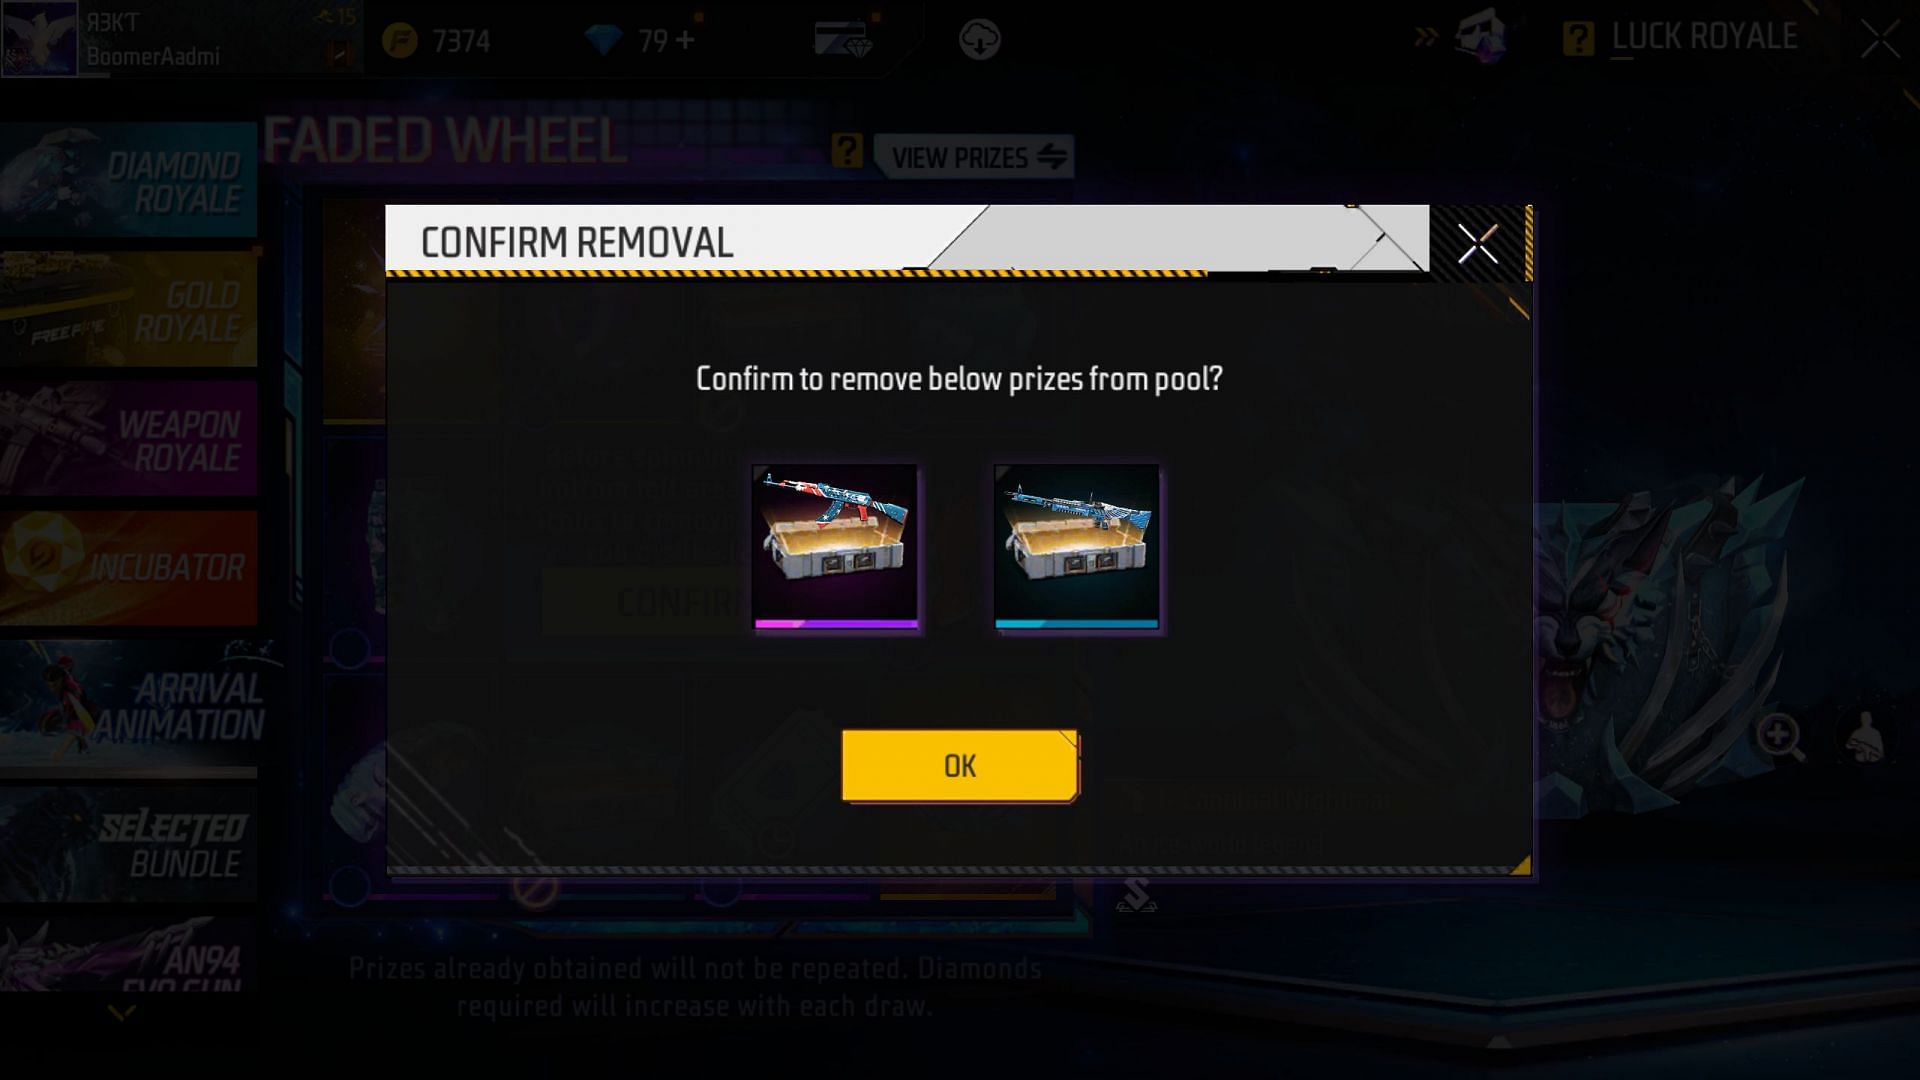 Confirm the removal to proceed to the next interface (Image via Garena)